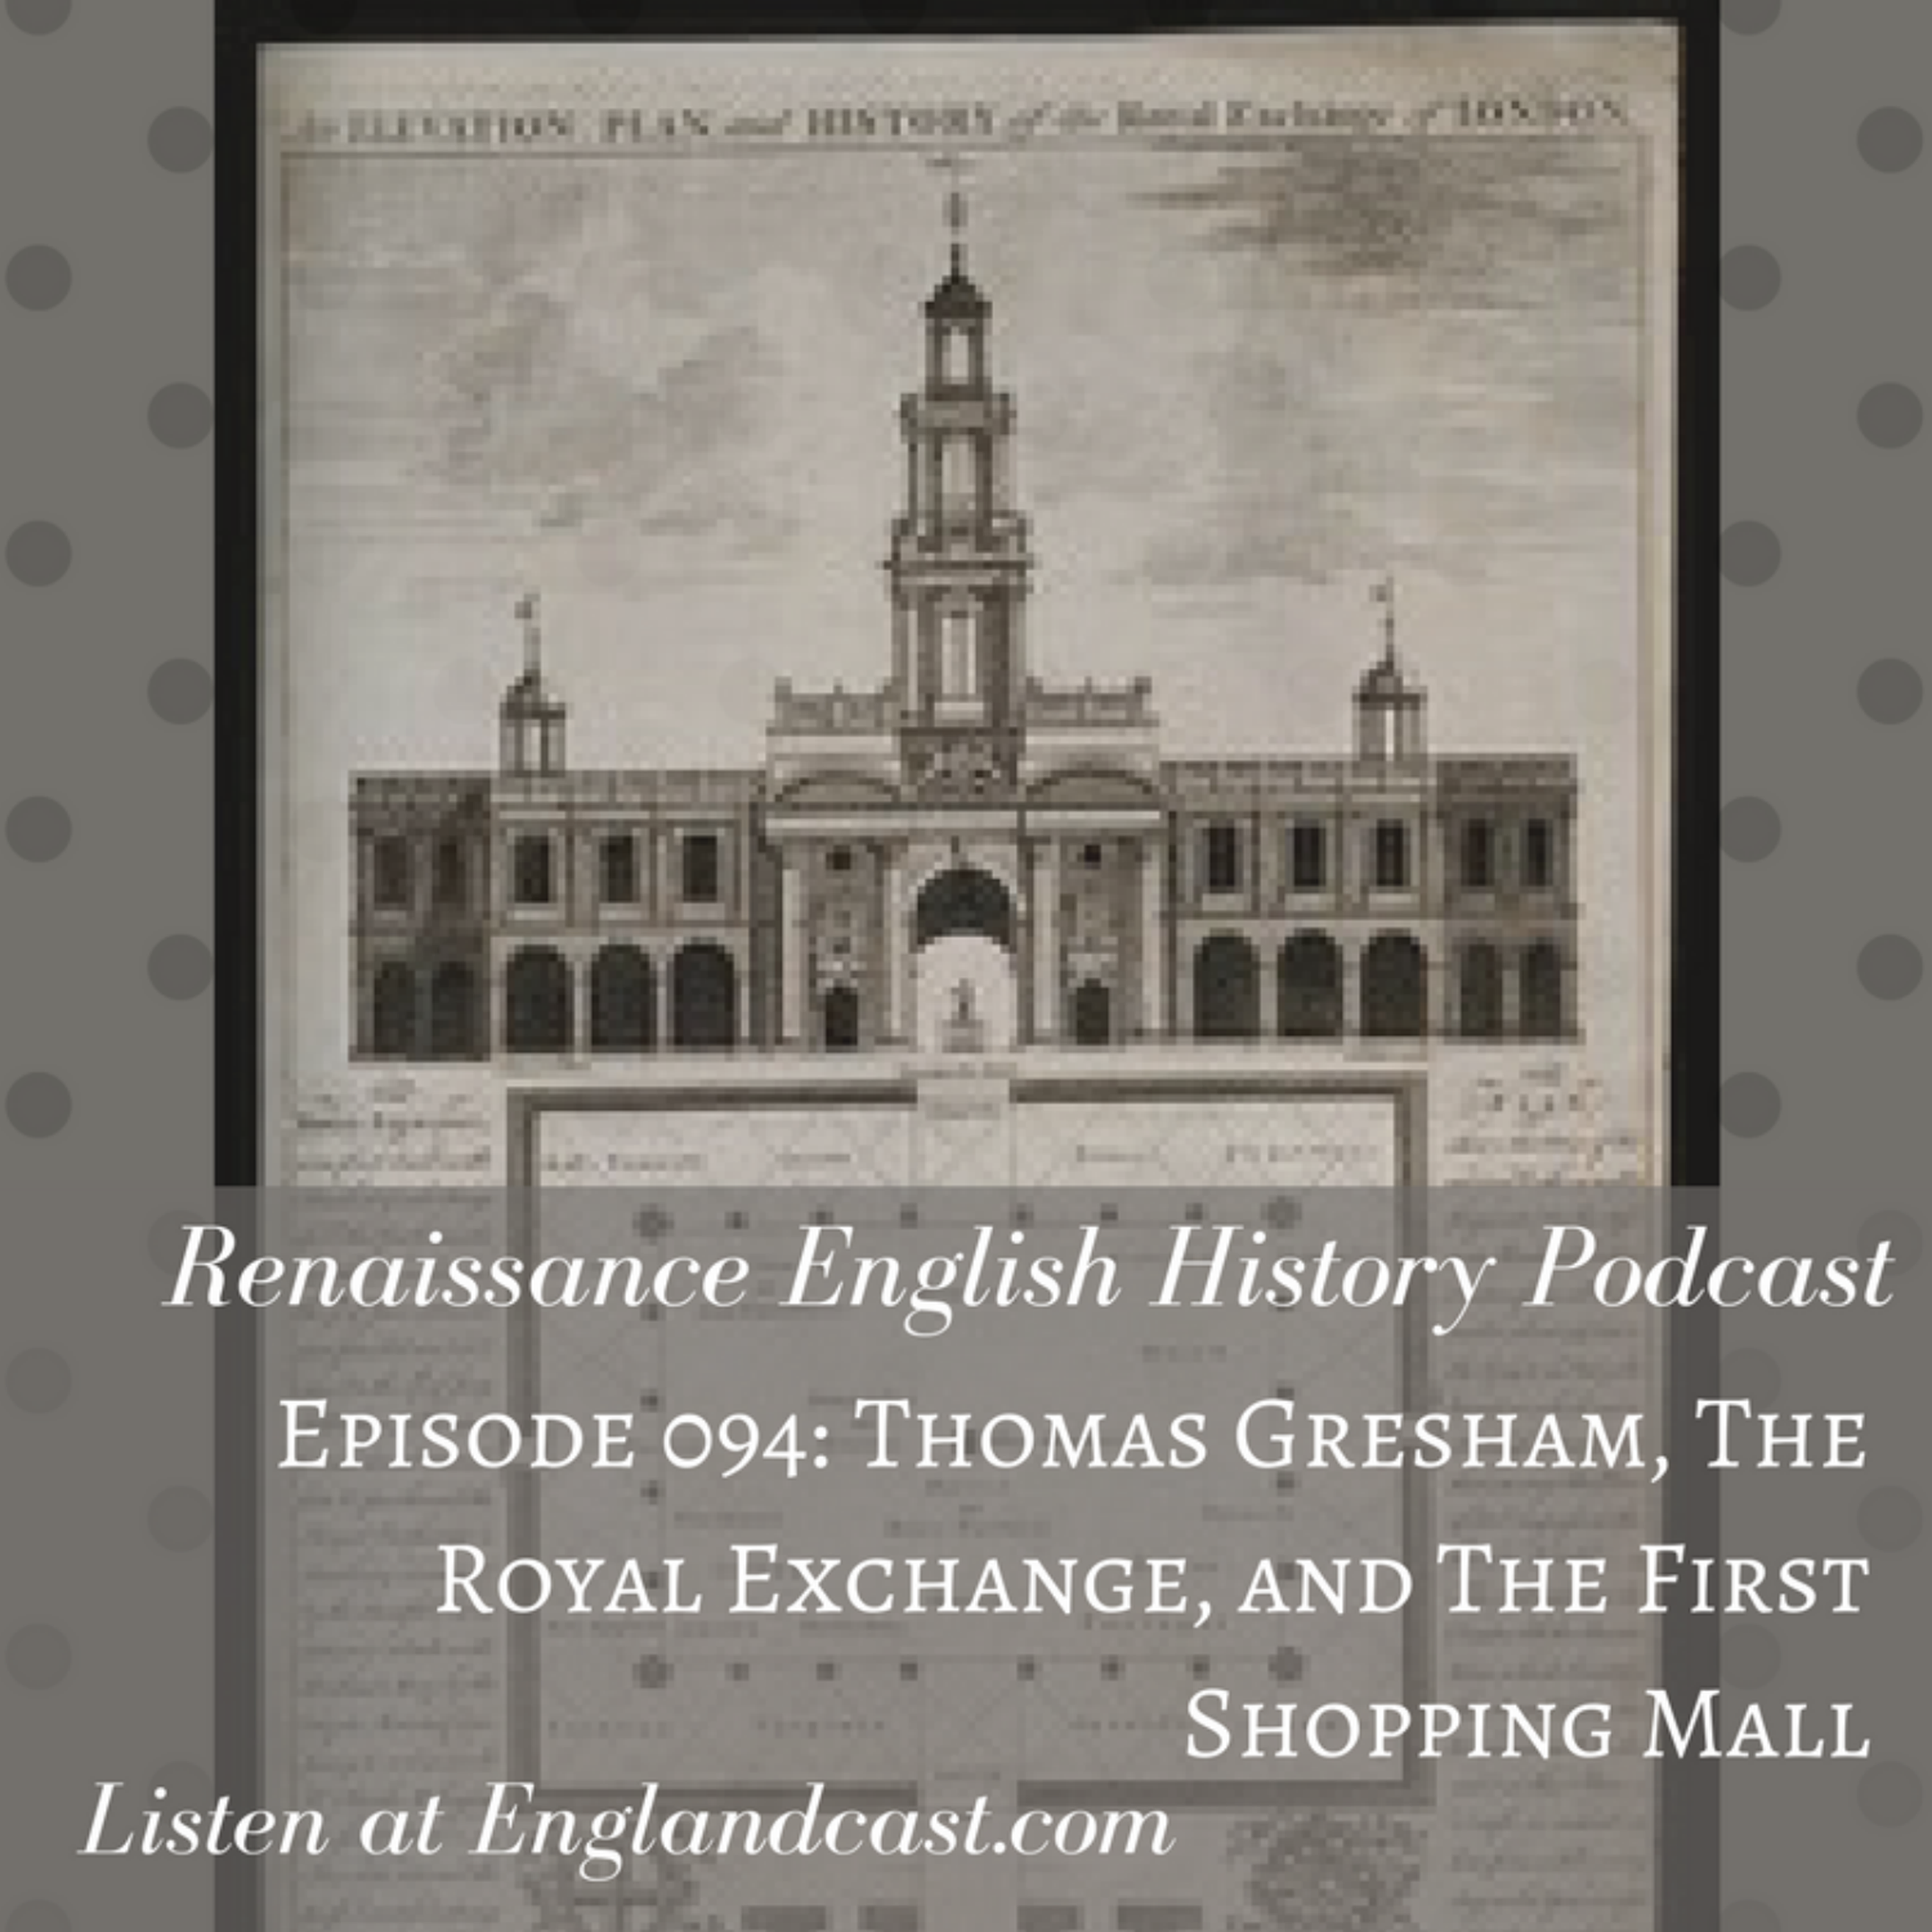 Episode 094: Thomas Gresham, and the Royal Exchange: England's First Shopping Mall